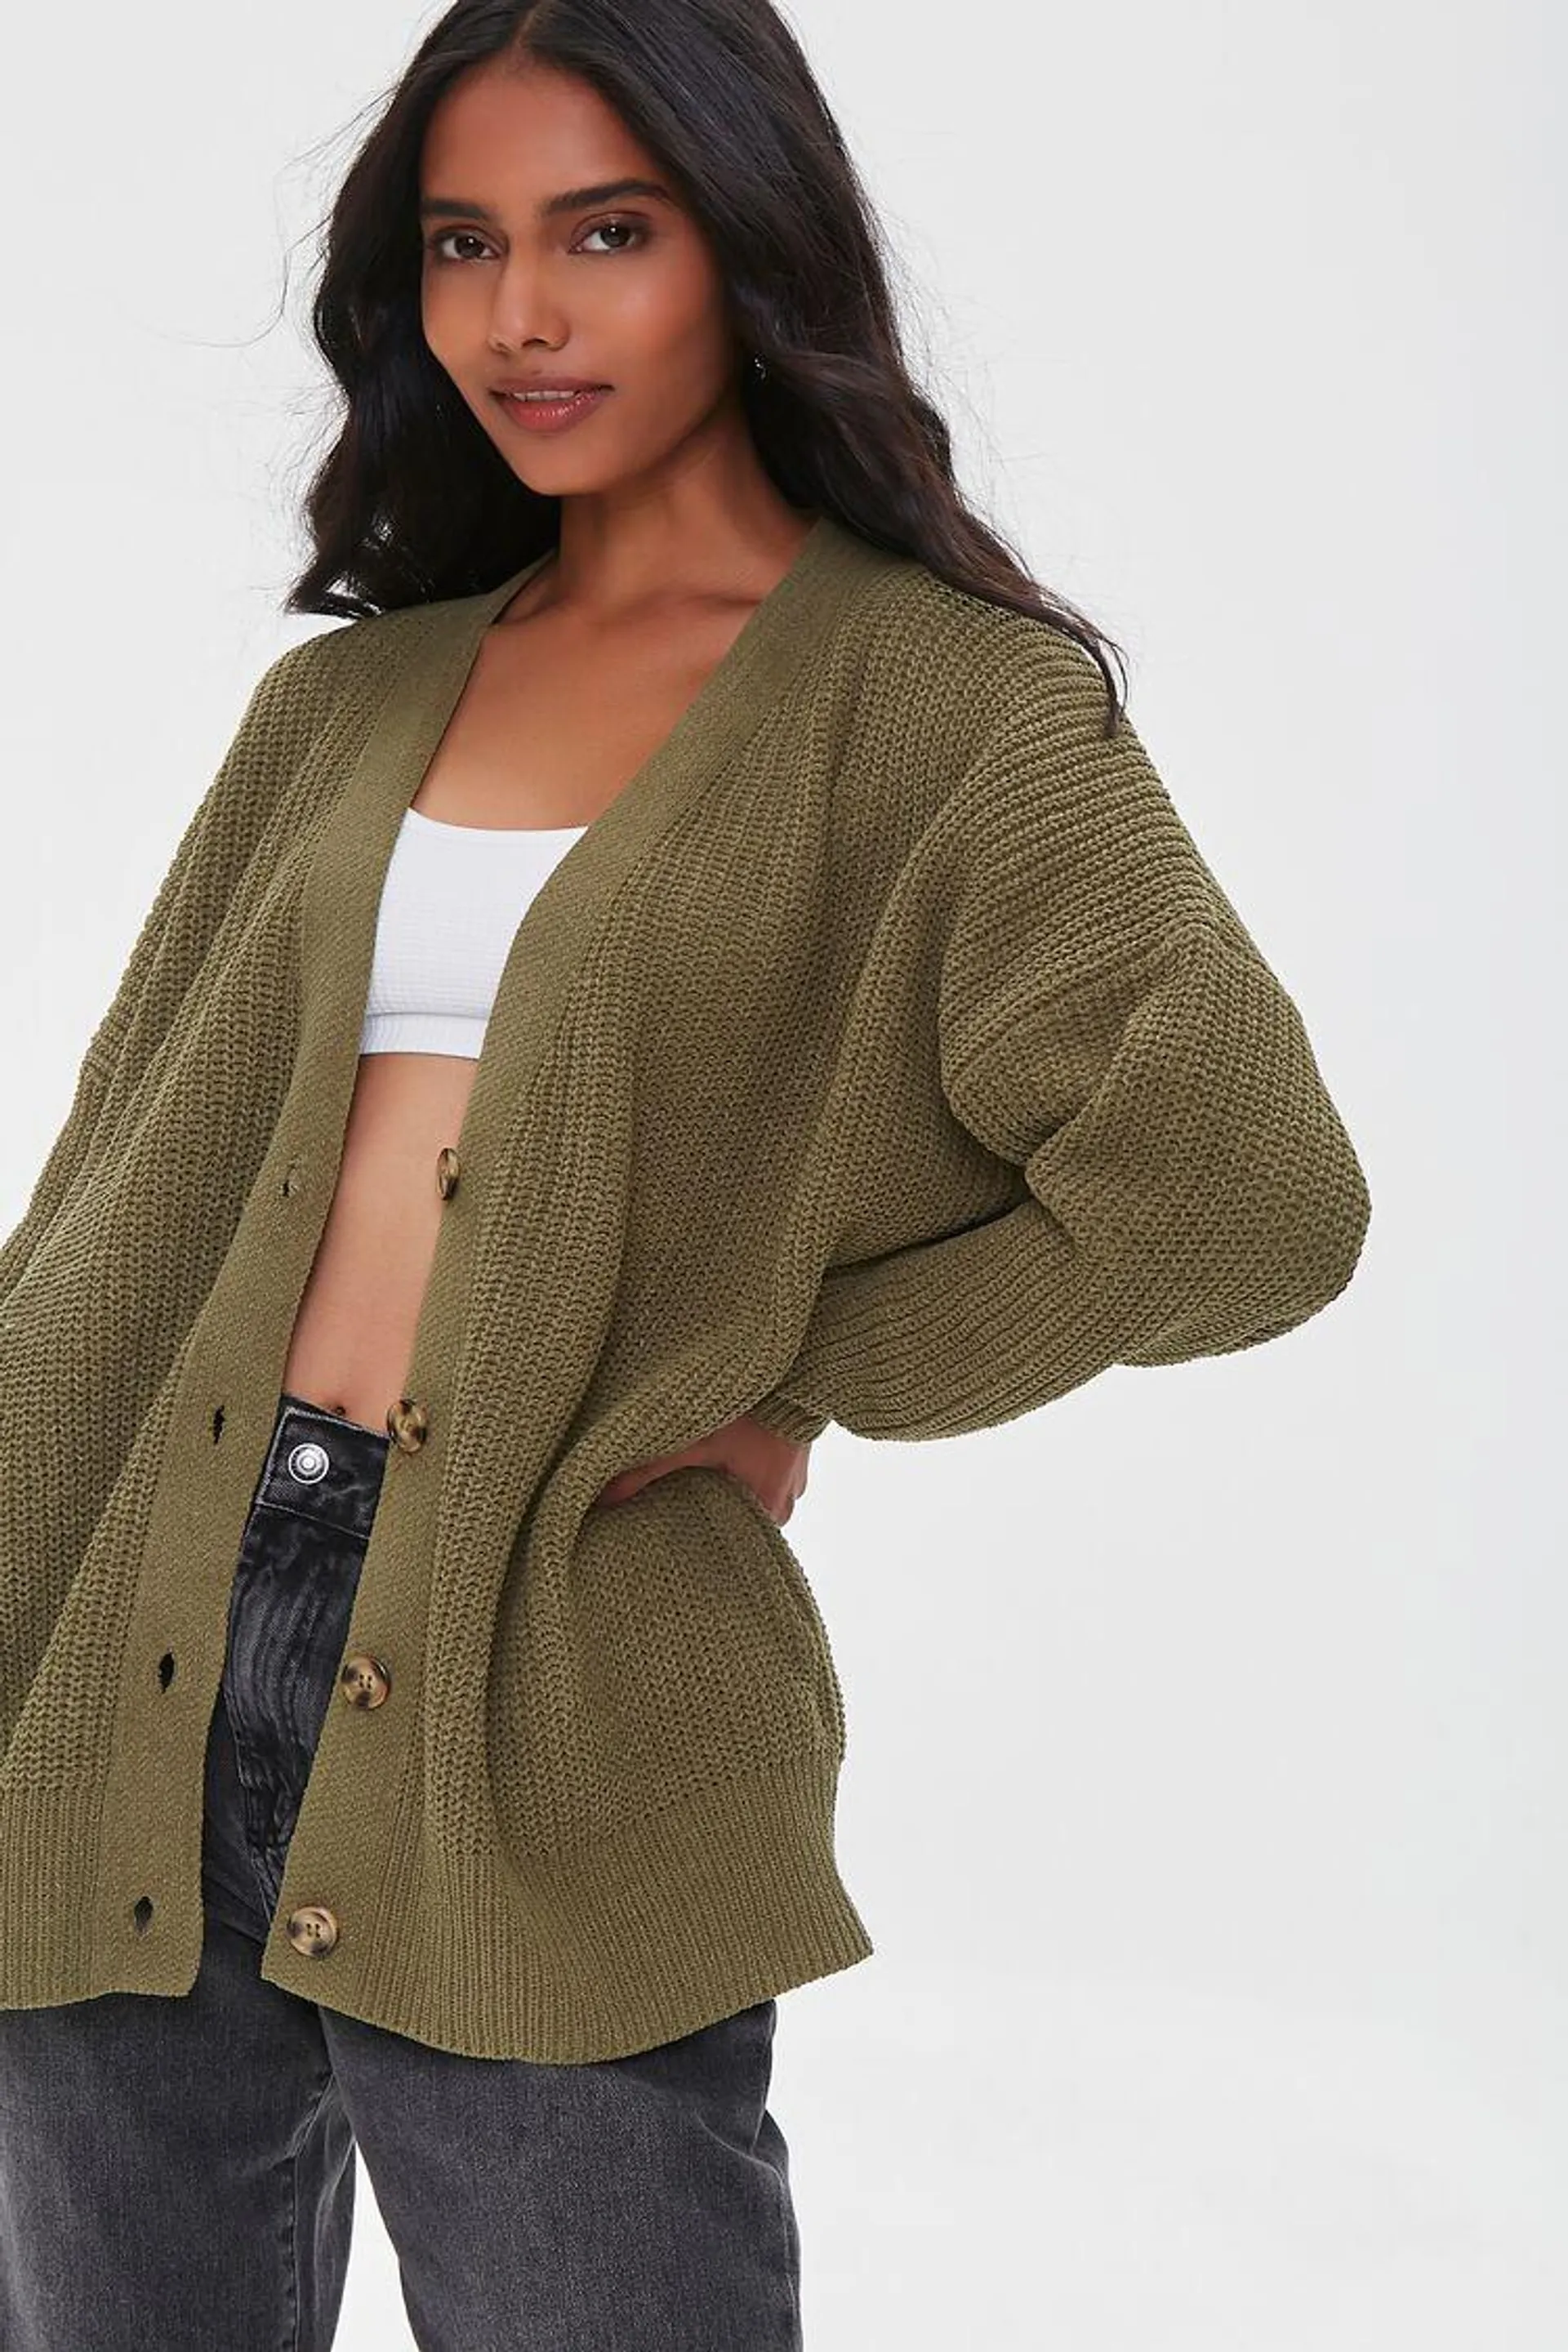 Sweater Mujer Olive